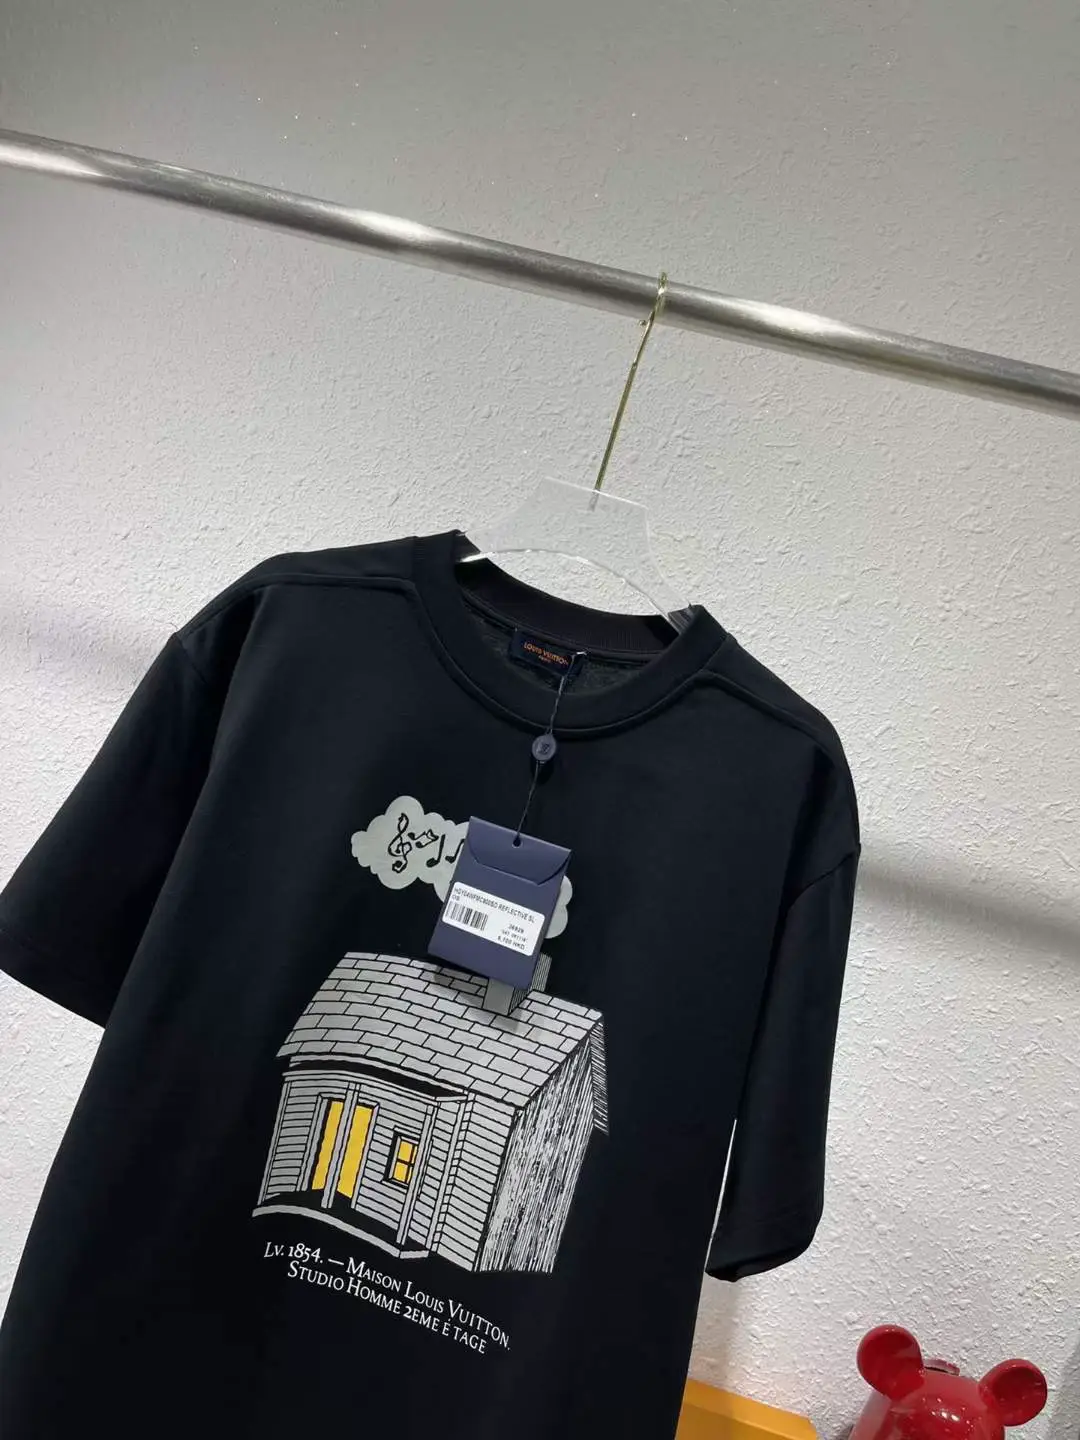 LOUIS VUITTON 23 COTTON OVERSIZE T SHIRT, Gallery posted by Dico_Italy